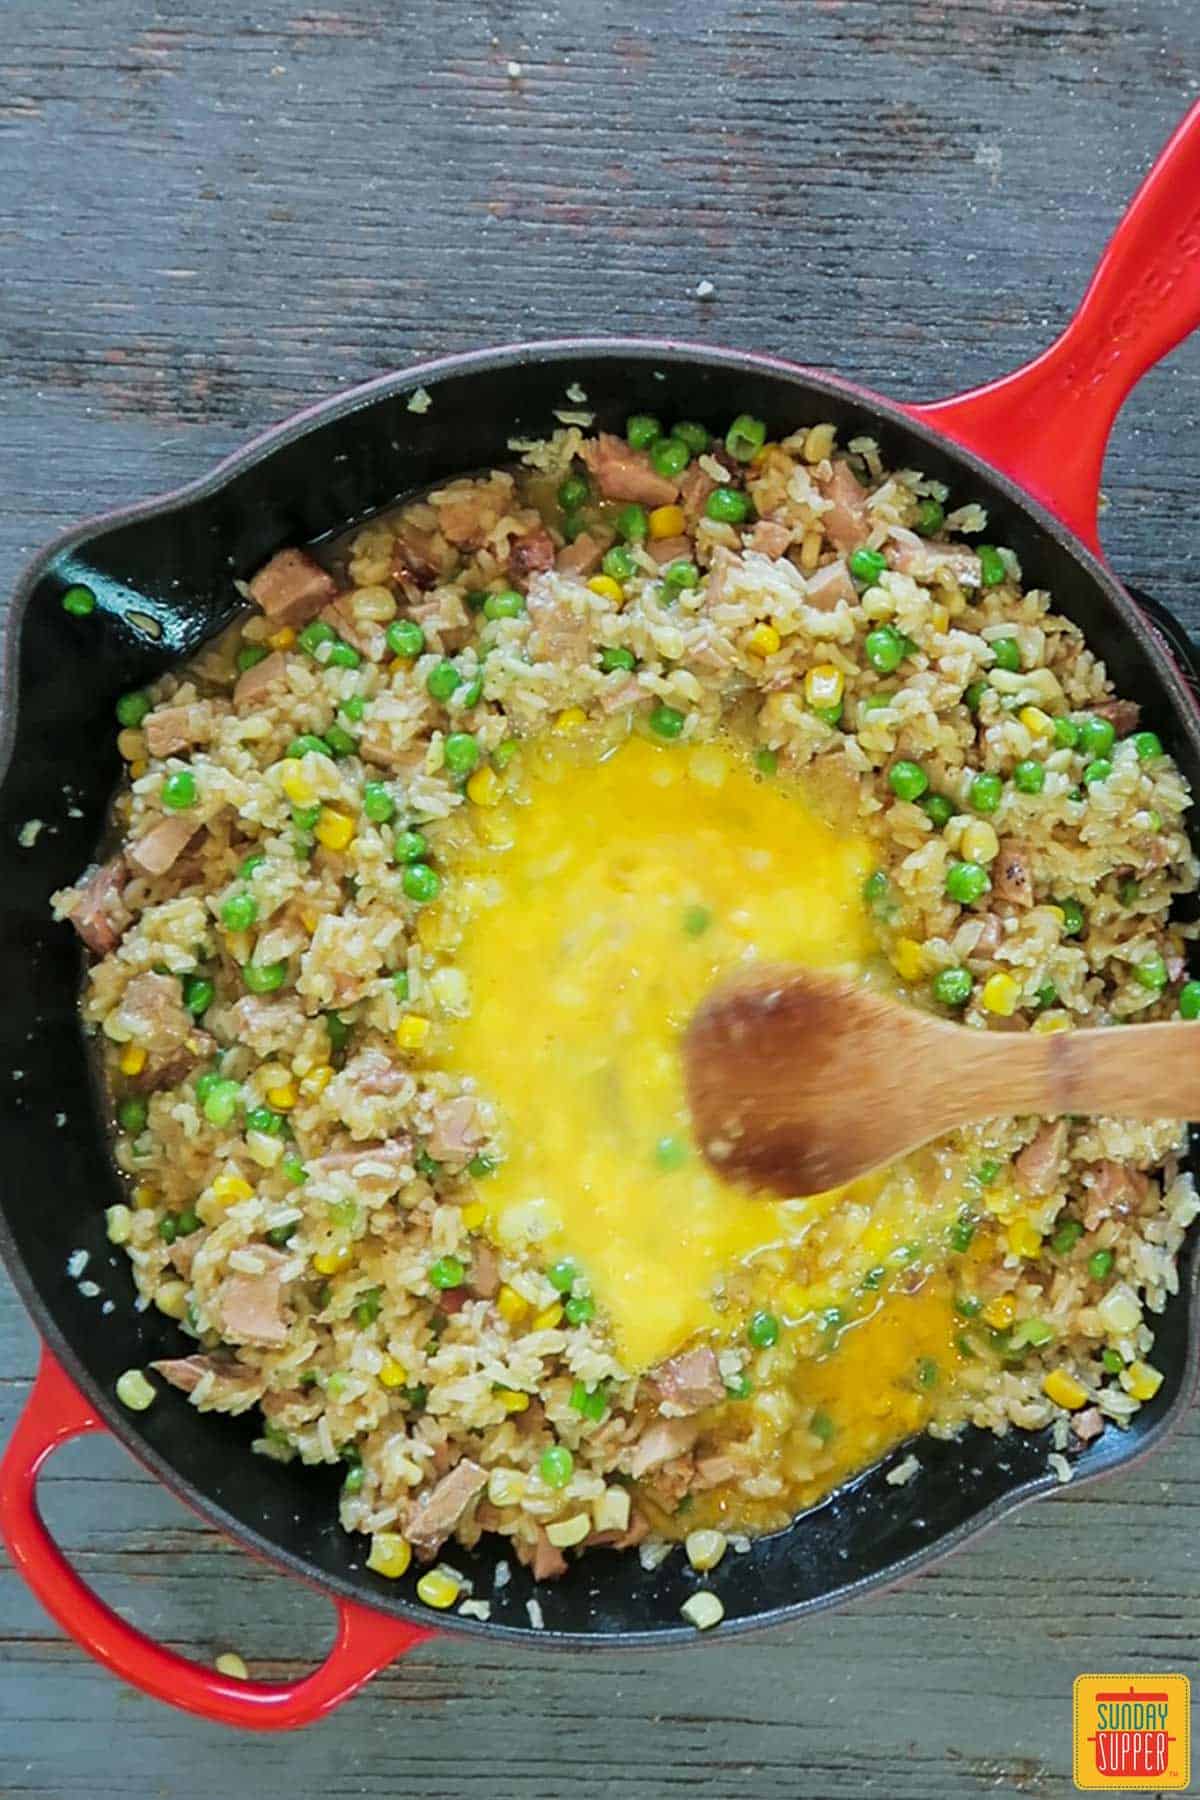 Adding eggs to the well in the fried rice